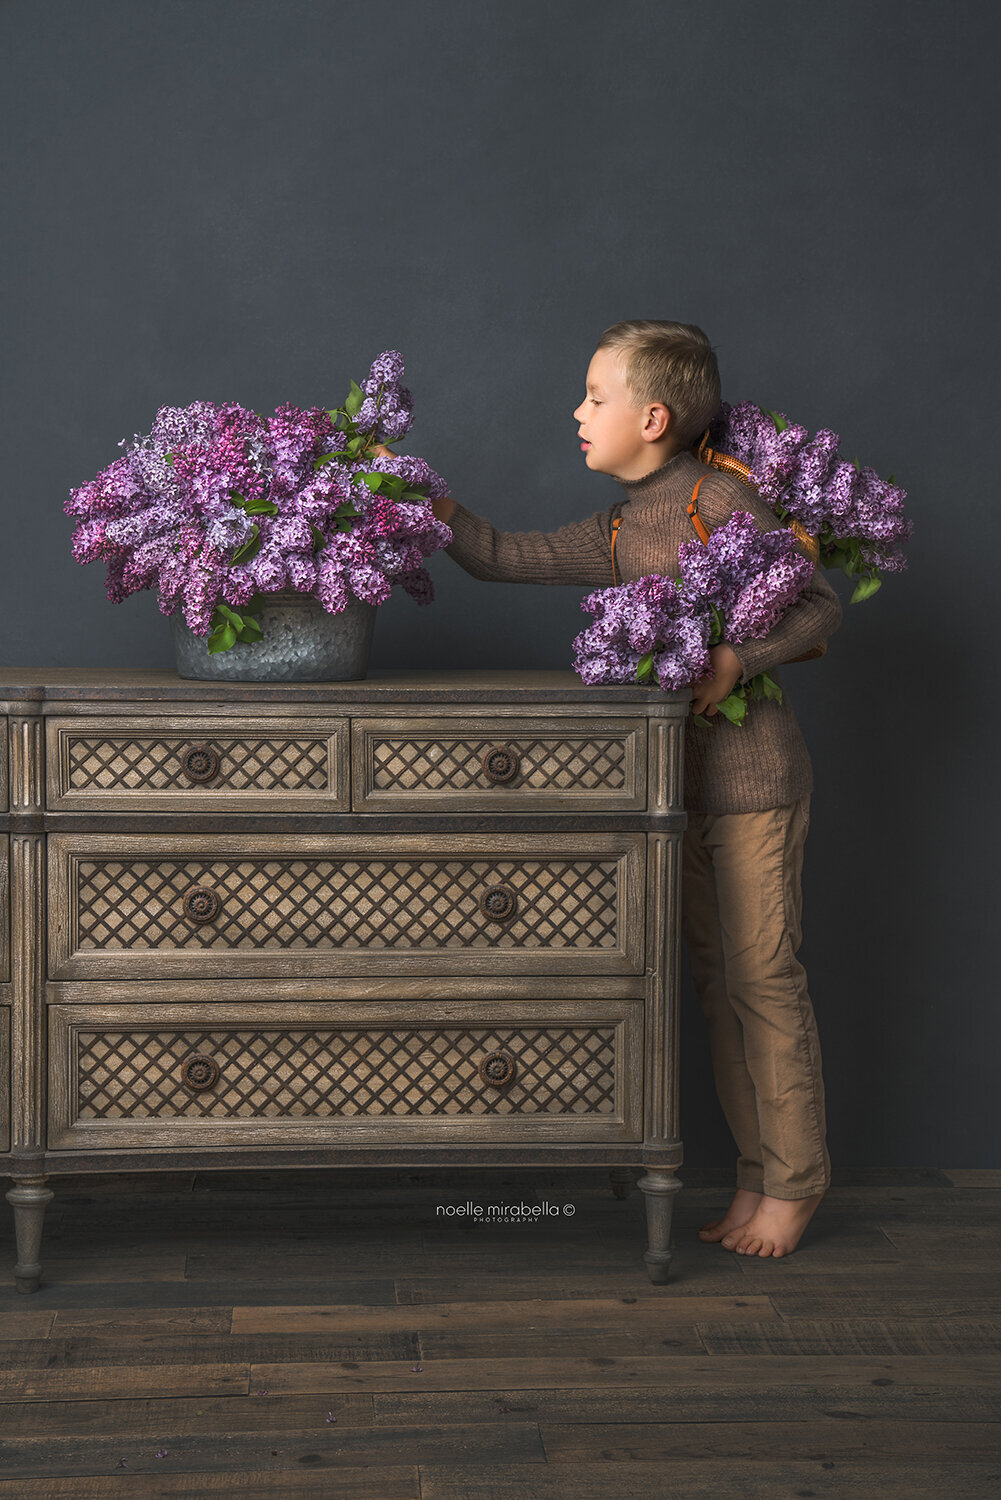 Boy standing on tip toes on edge of wooden dresser arranging fresh lilc blooms in a metal tub.